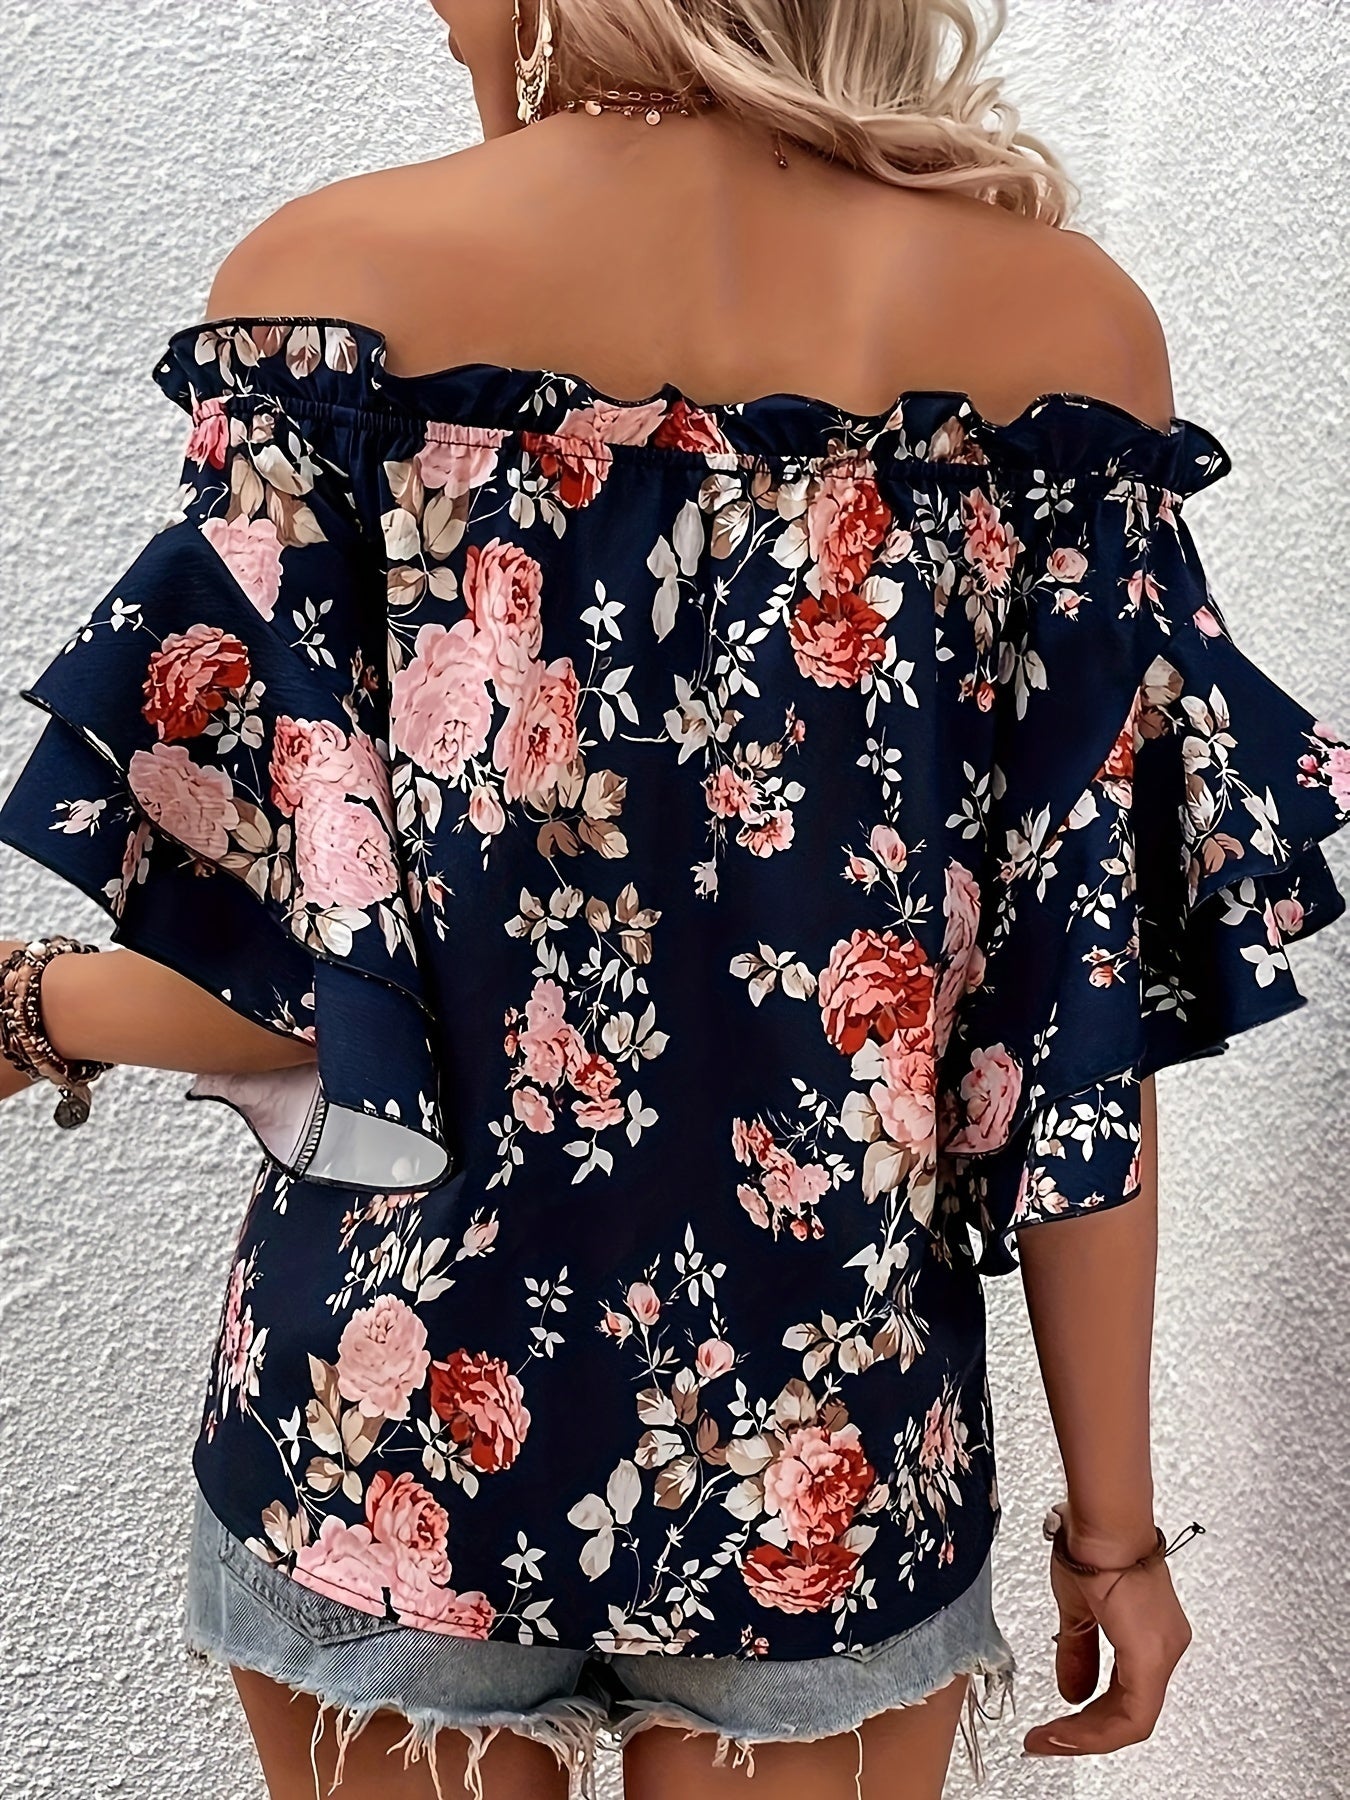 Plus Size Strapless Elegant Floral Print Off Shoulder Blouse - Woven Polyester Vacation Style with Ruffle Sleeve and Layered Design - Perfect for Spring and Summer Seasons